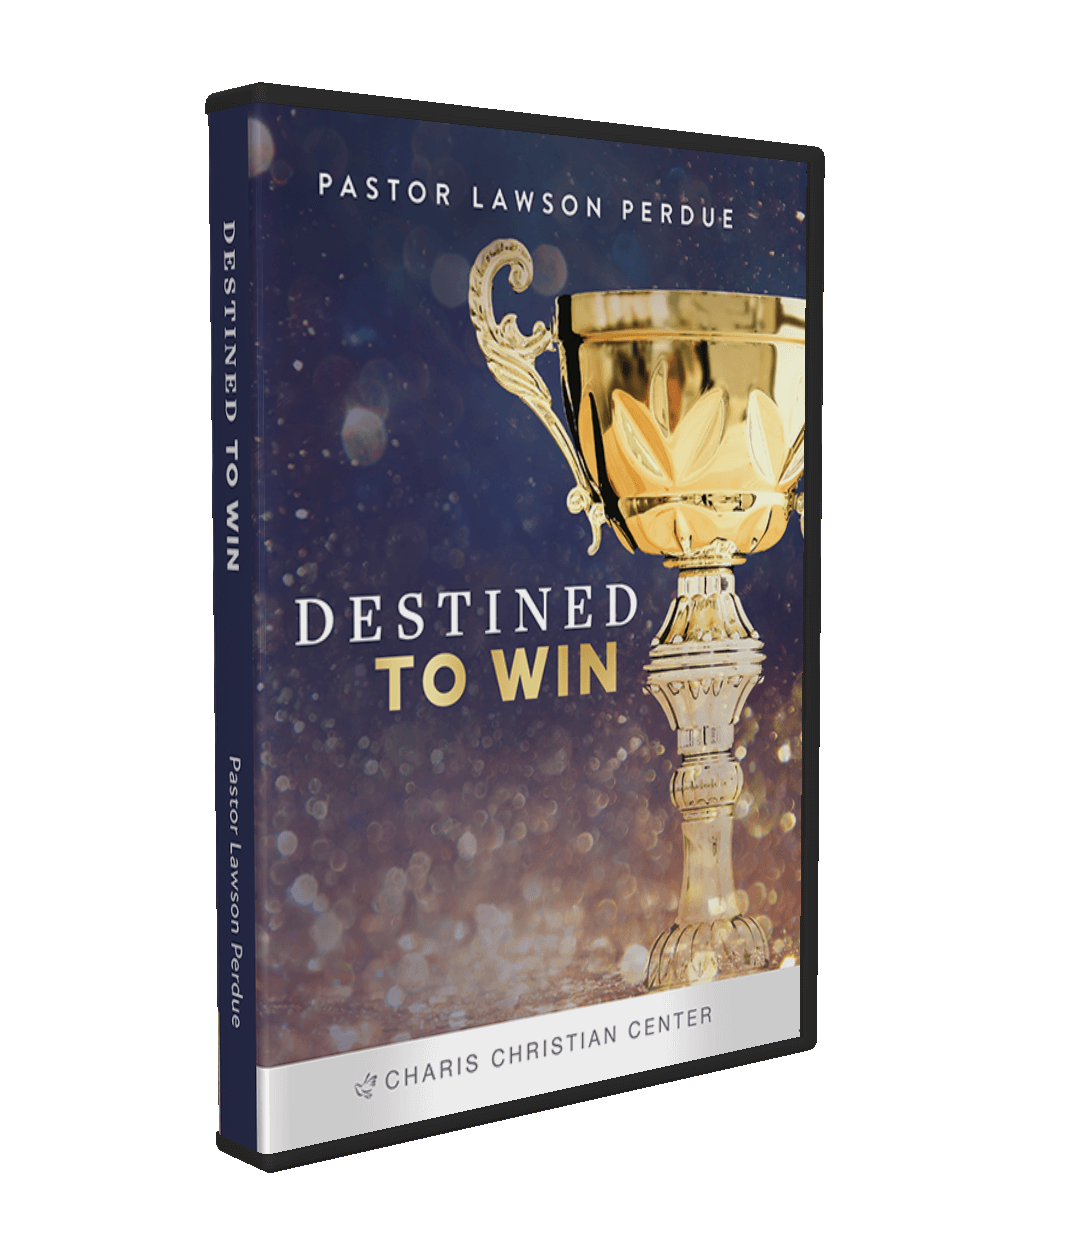 Destined to Win 8-part CD series from Pastor Lawson Perdue